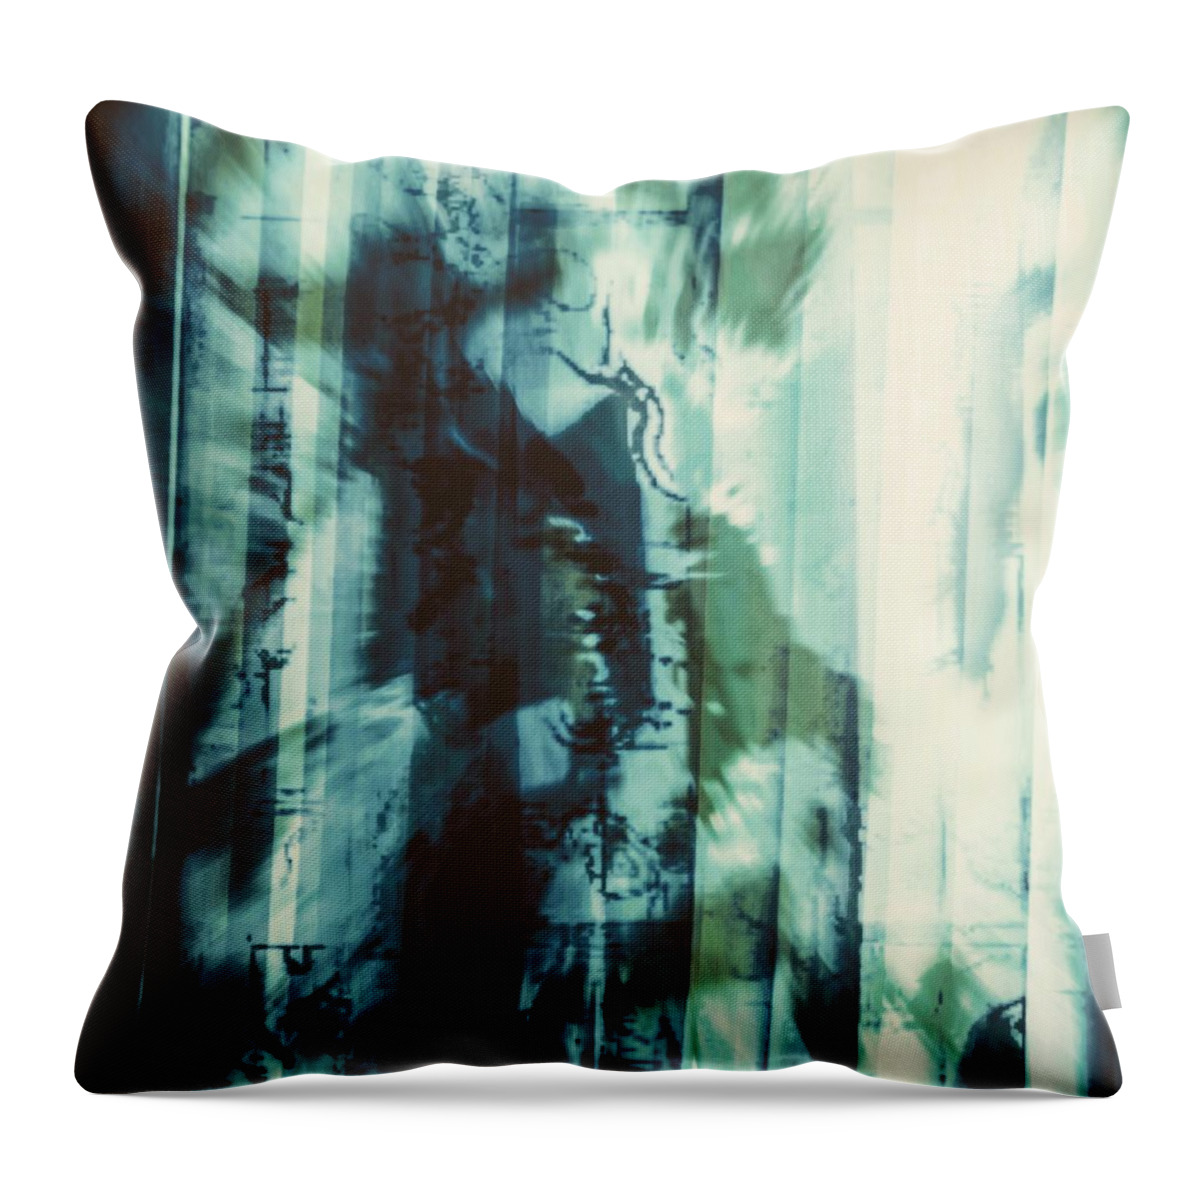 Background Throw Pillow featuring the digital art Background 39 by Marko Sabotin